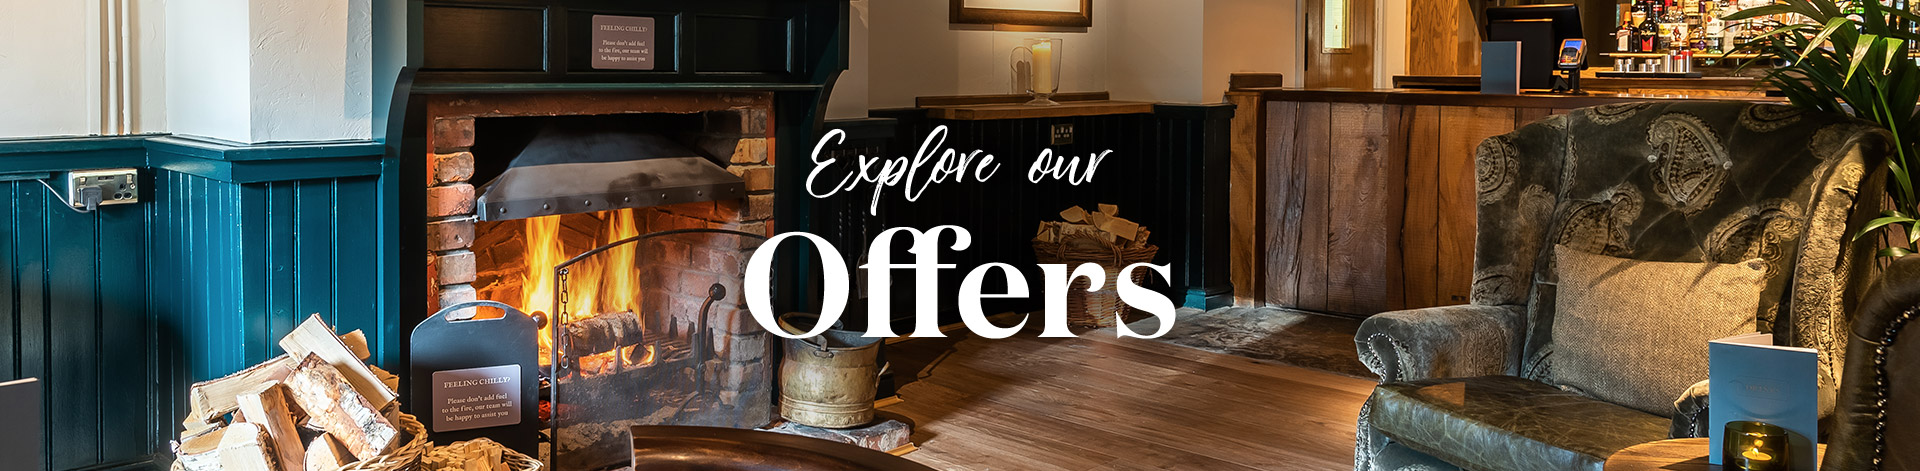 Our latest offers at The Boat Inn